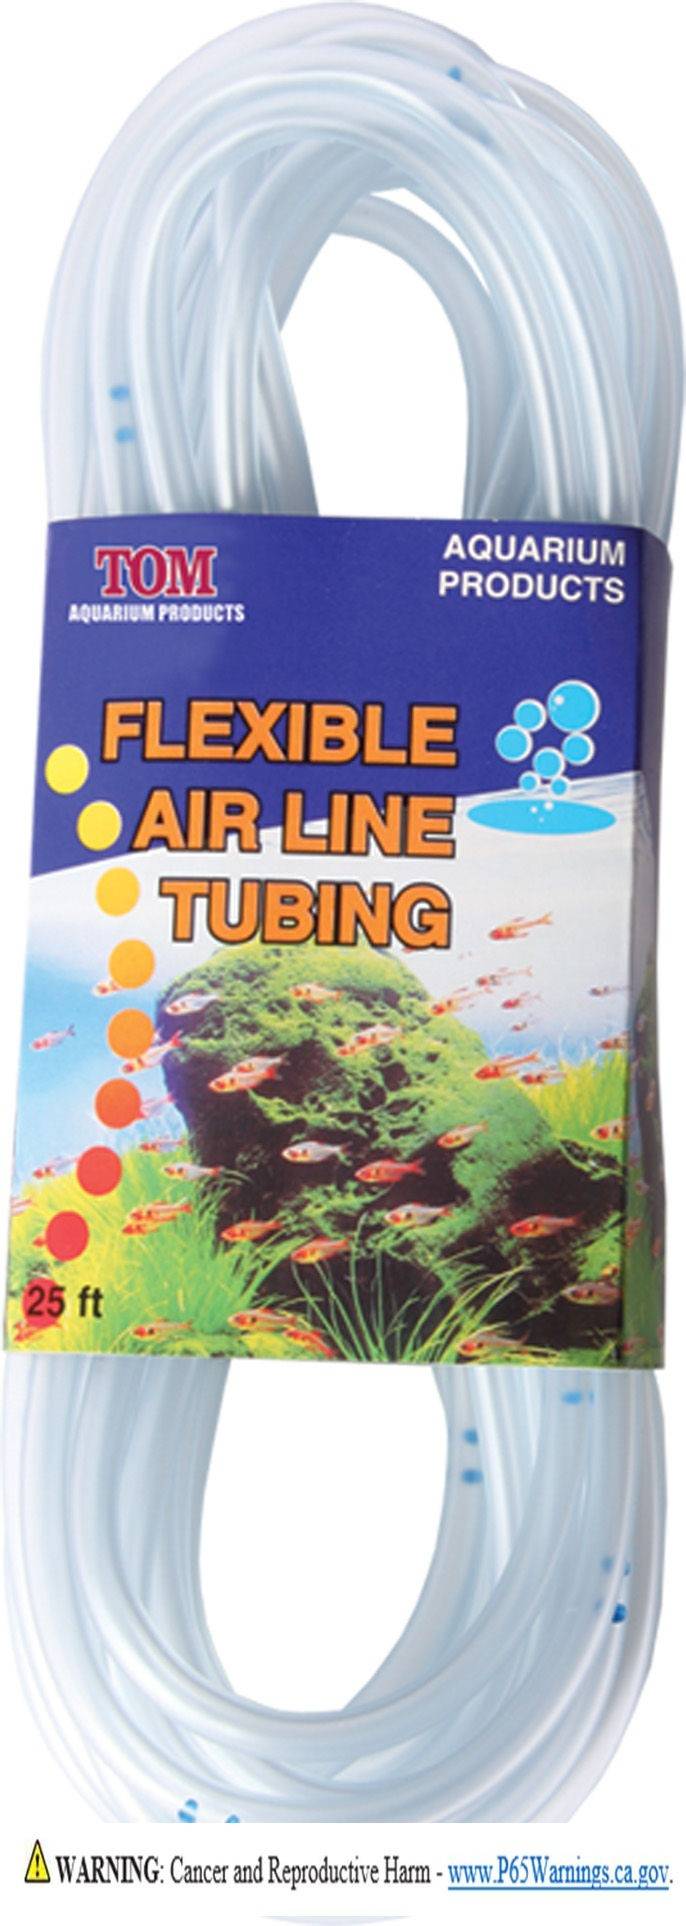 8 and 25 Ft Flexible Airline Tubing - Koller Products